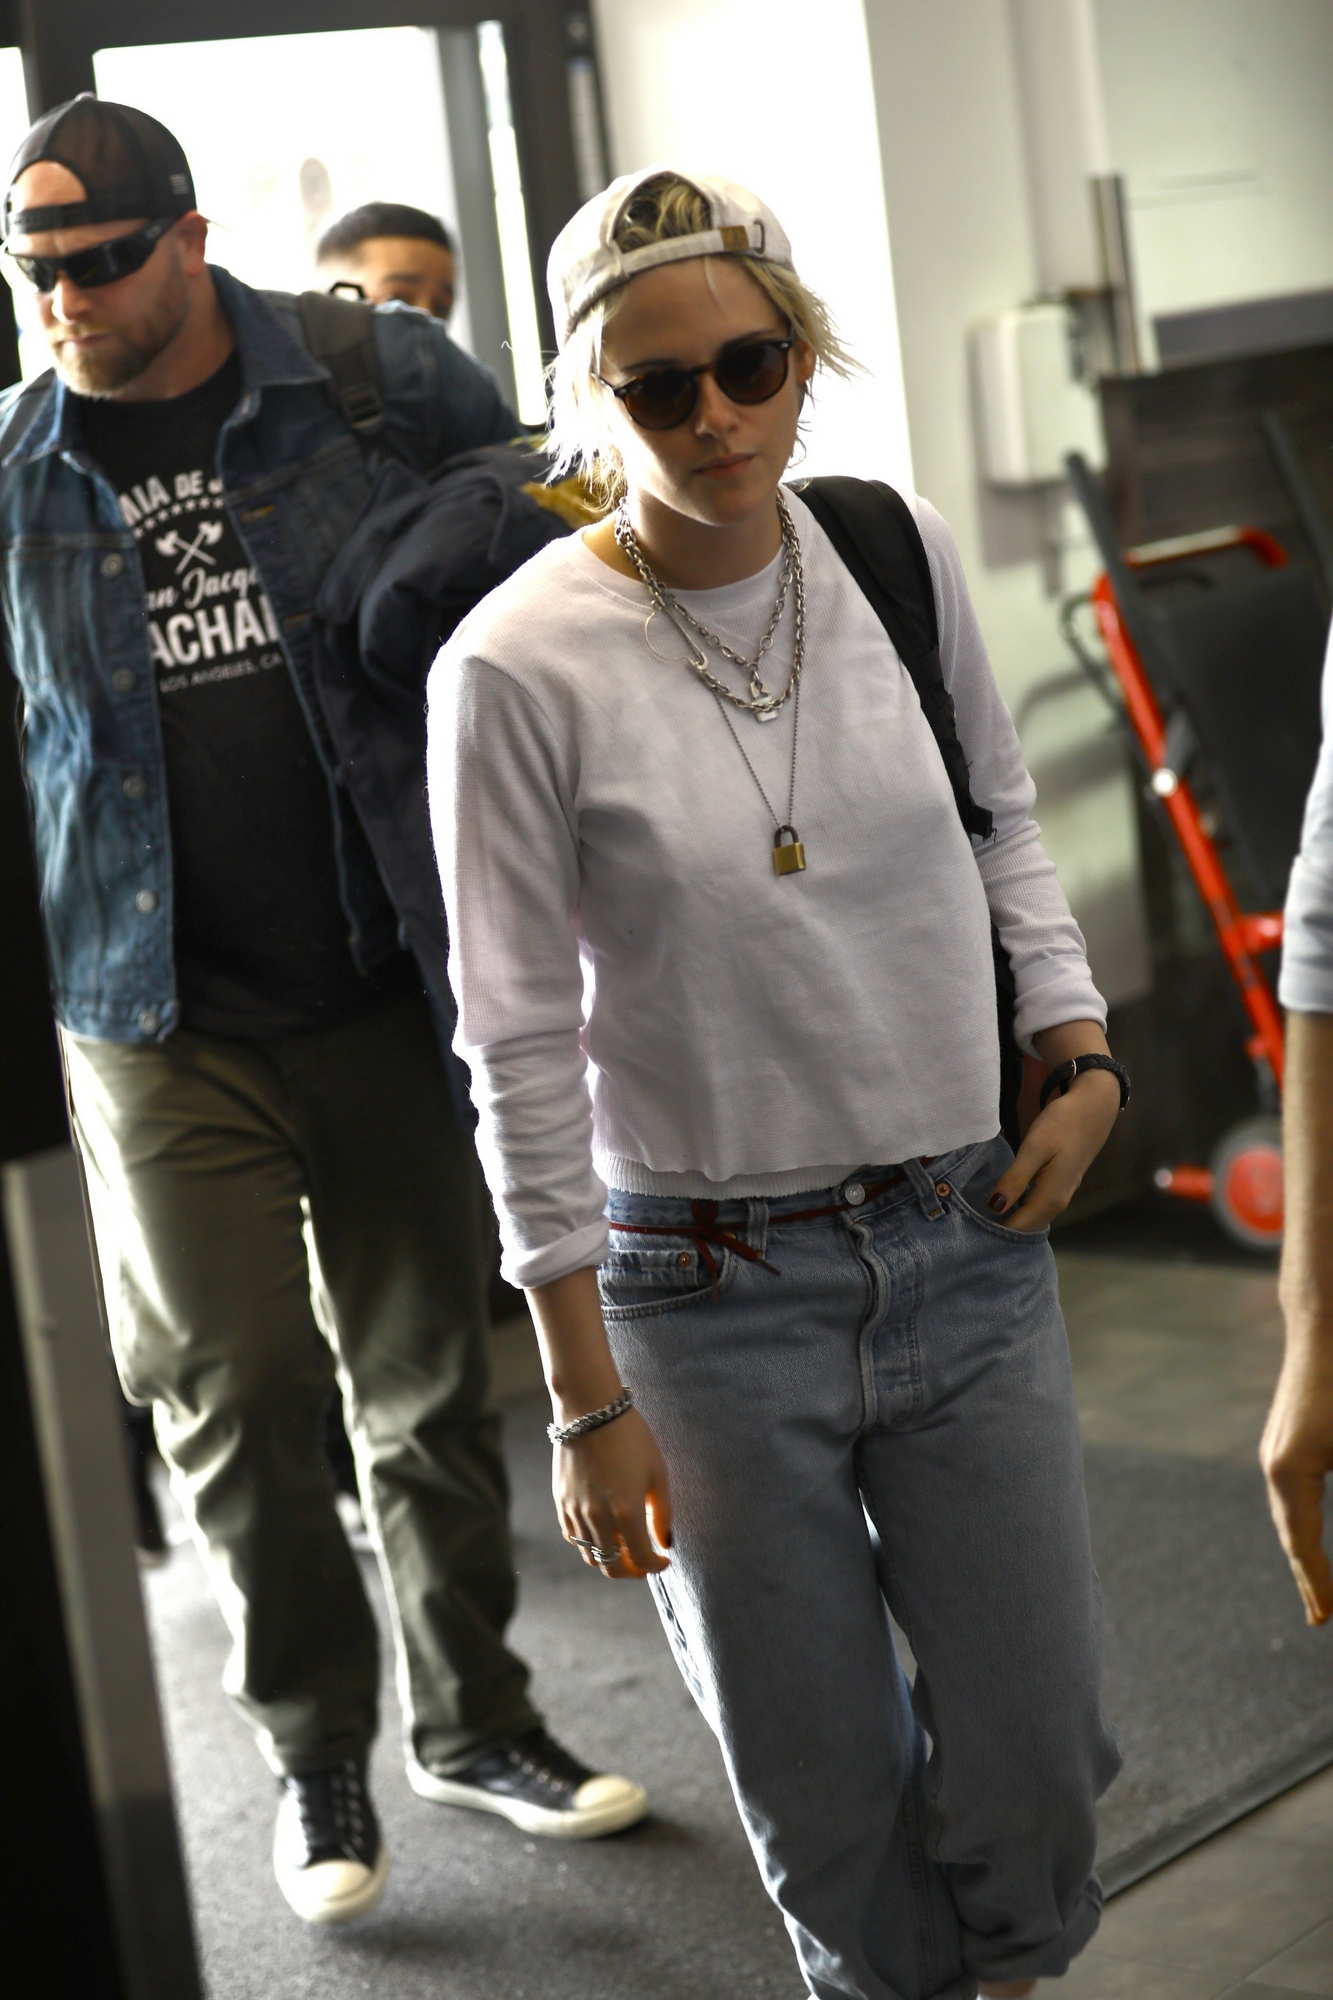 Kristen Stewart arrives at LAX airport in Los Angeles, CA on January 8th